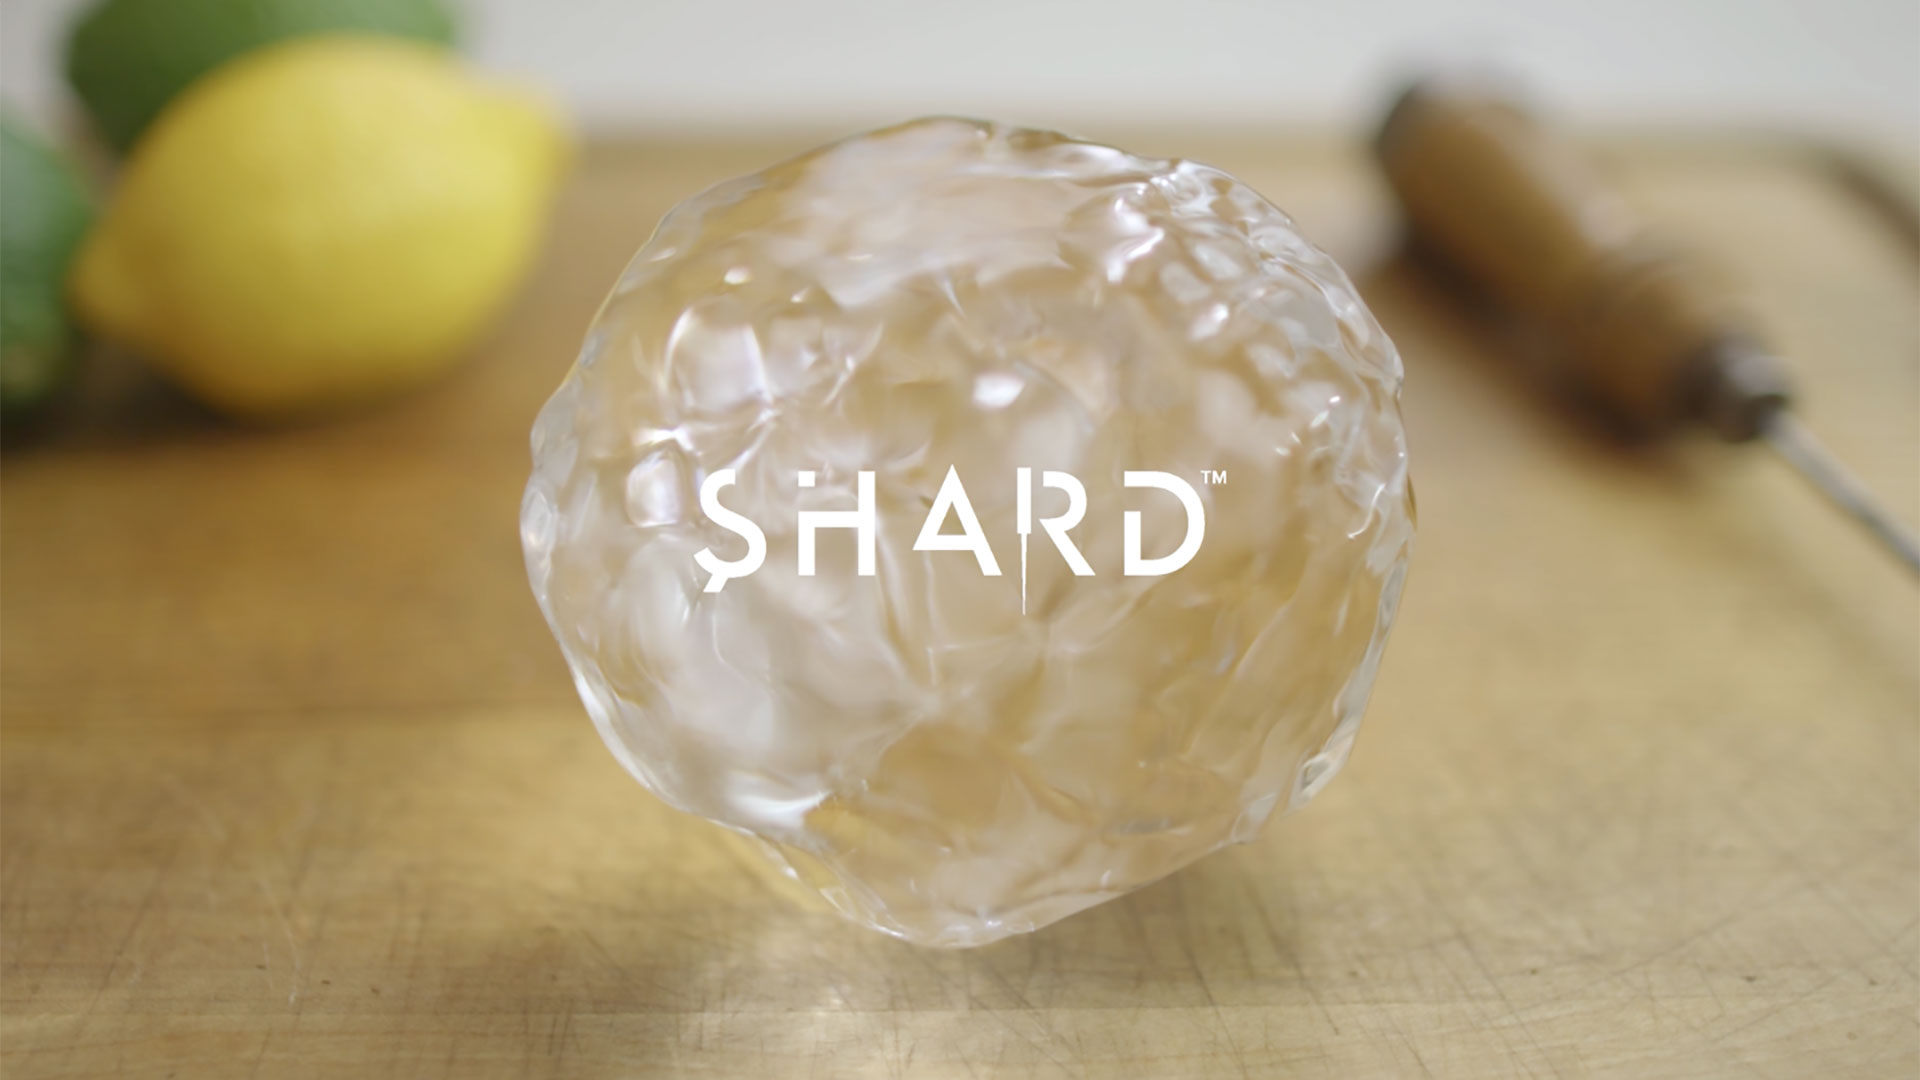 Hand-carved ice ball on a cutting board overlaid with the Shard logo, with lemon, lime, and ice pick in the background